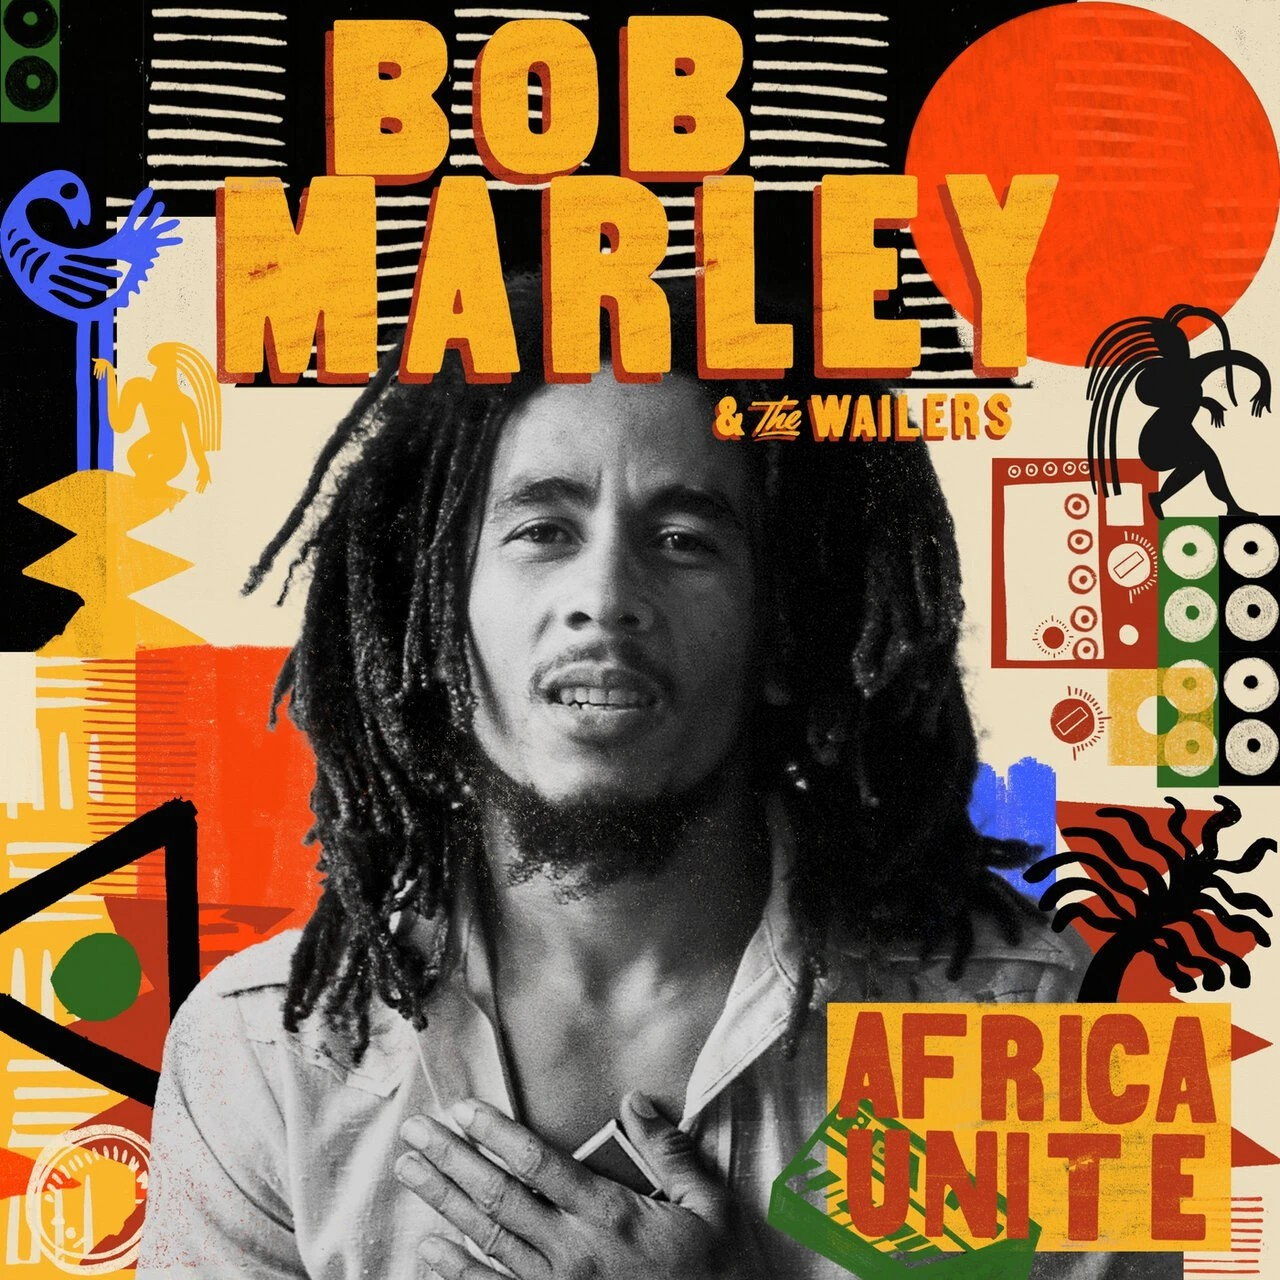 Bob Marley & The Wailers – Three Little Birds Ft. Teni & Oxlade mp3 download